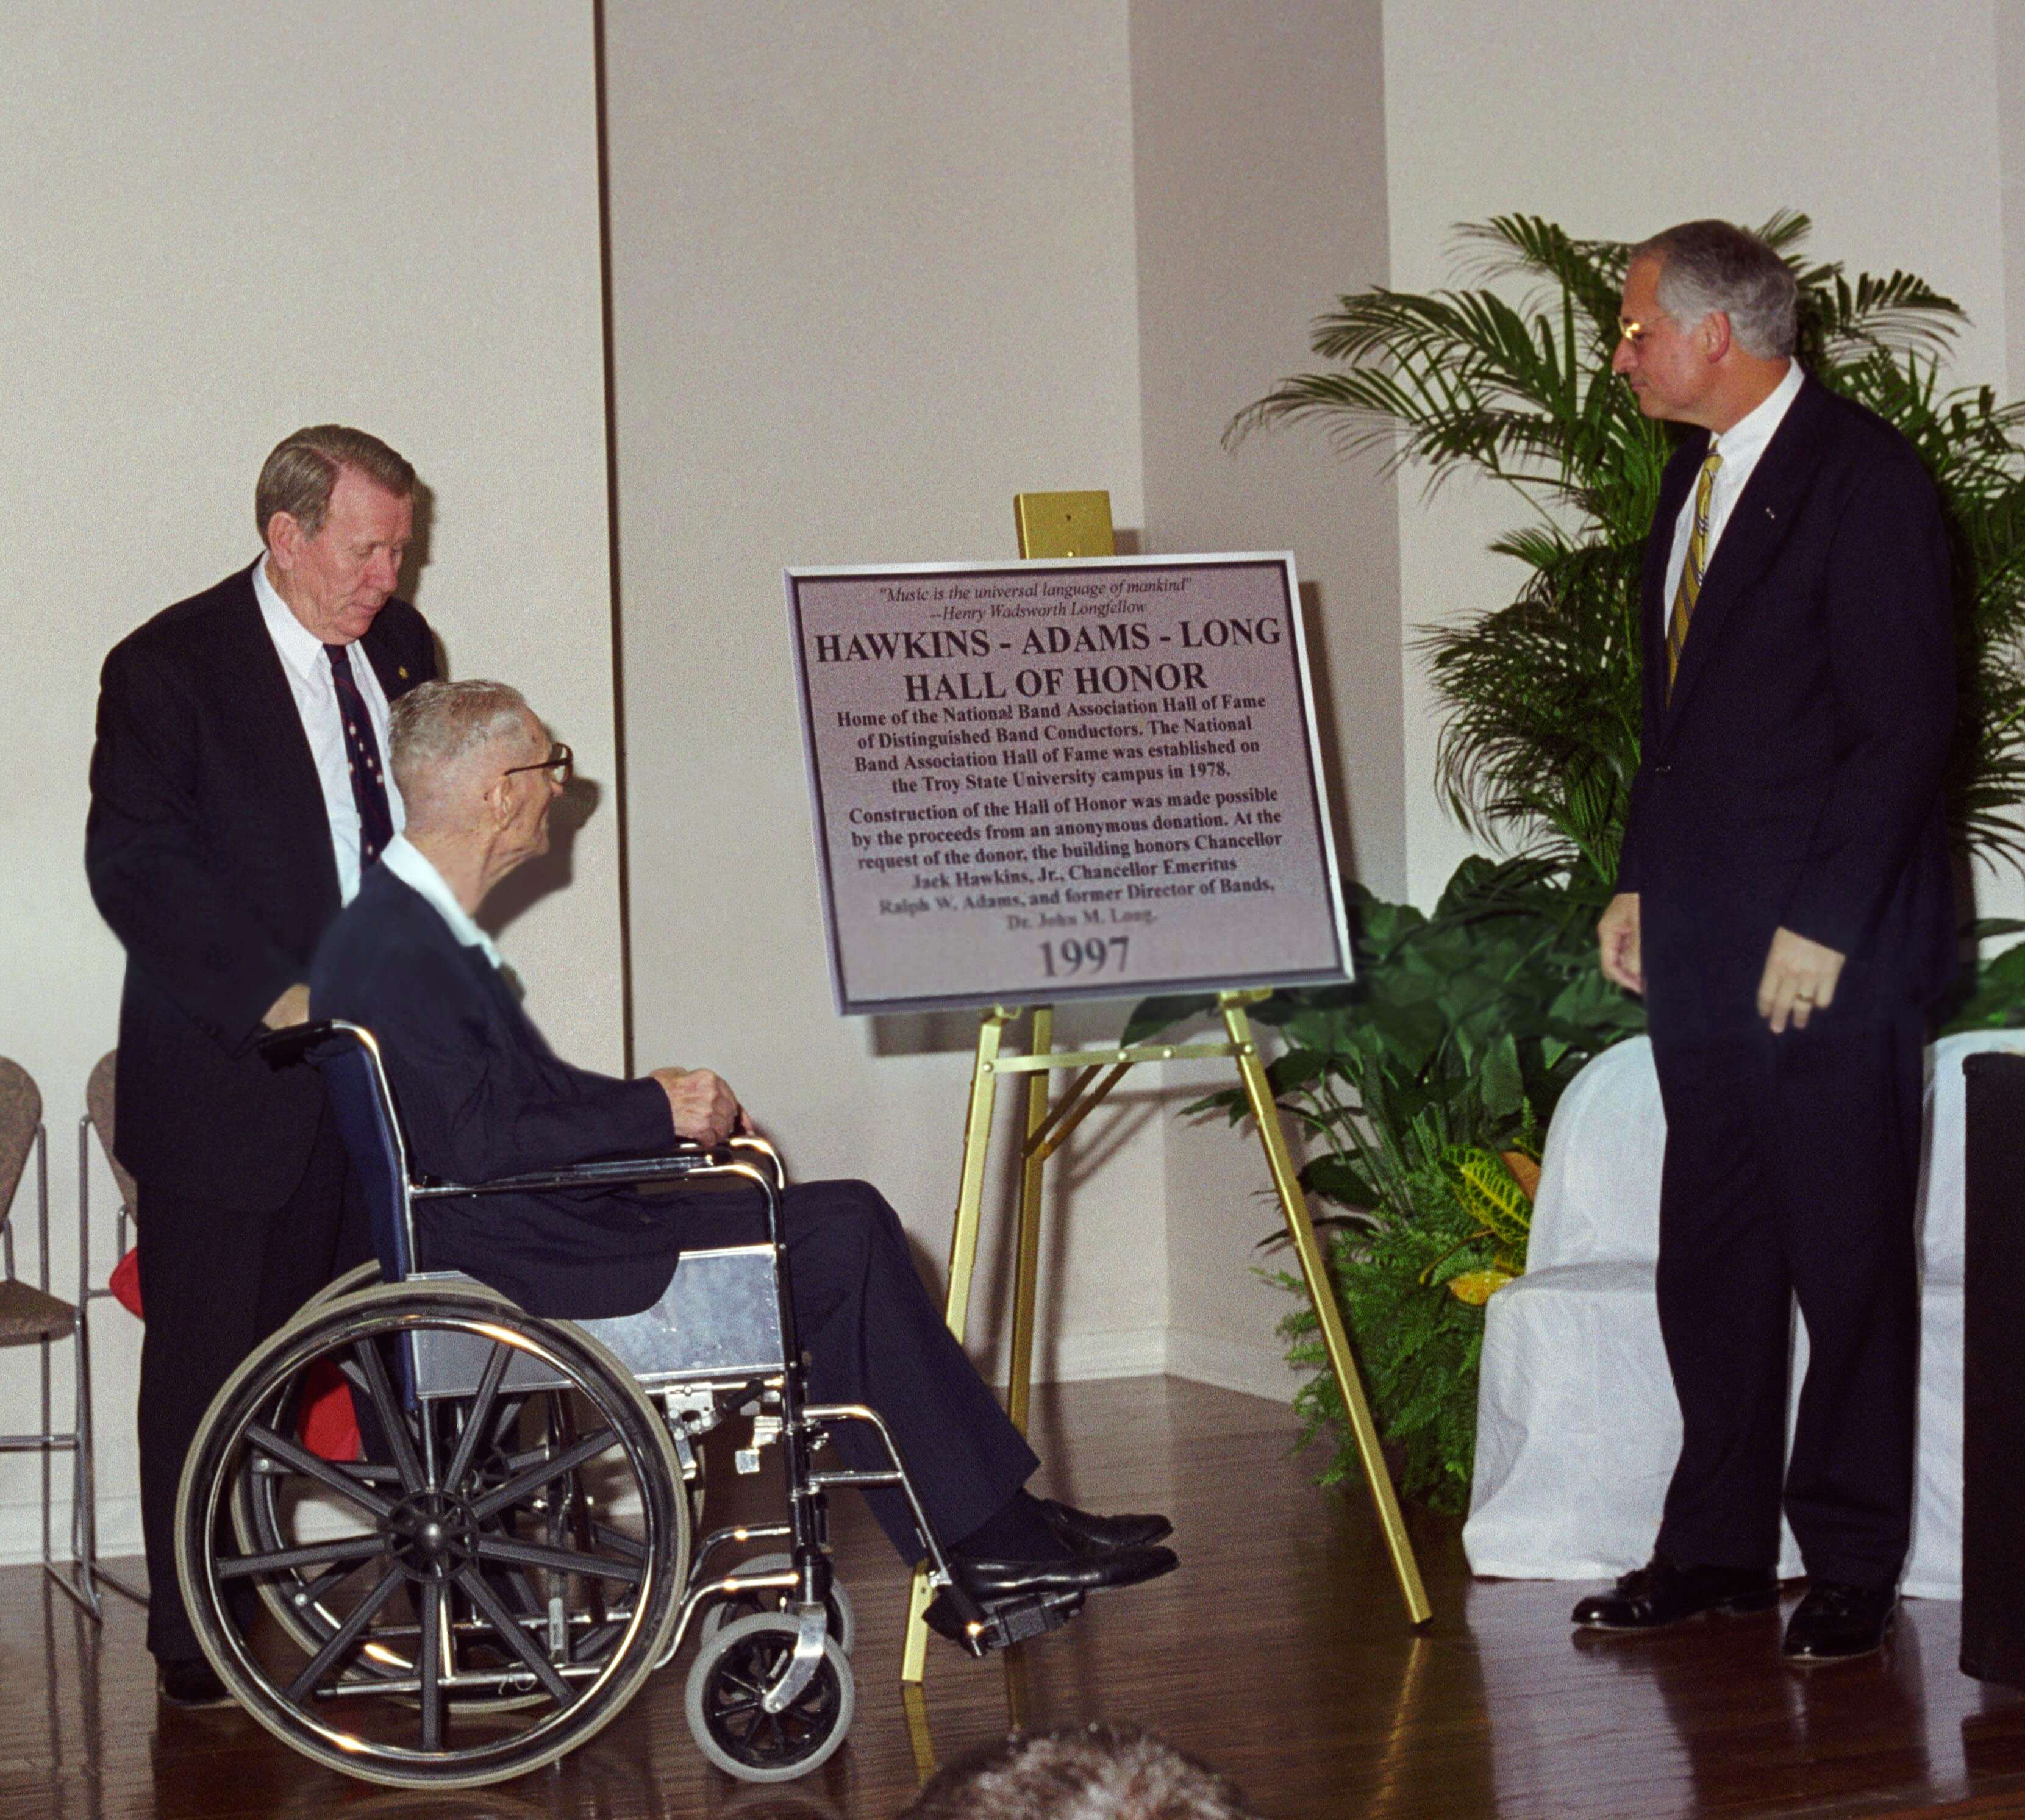 (from left) Dr. John M. Long, Dr. Ralph Wyatt Adams and Dr. Jack Hawkins, Jr., read the dedicatory plaque during ceremonies at the new Hawkins-Adams-Long Hall of Honor in 1997.